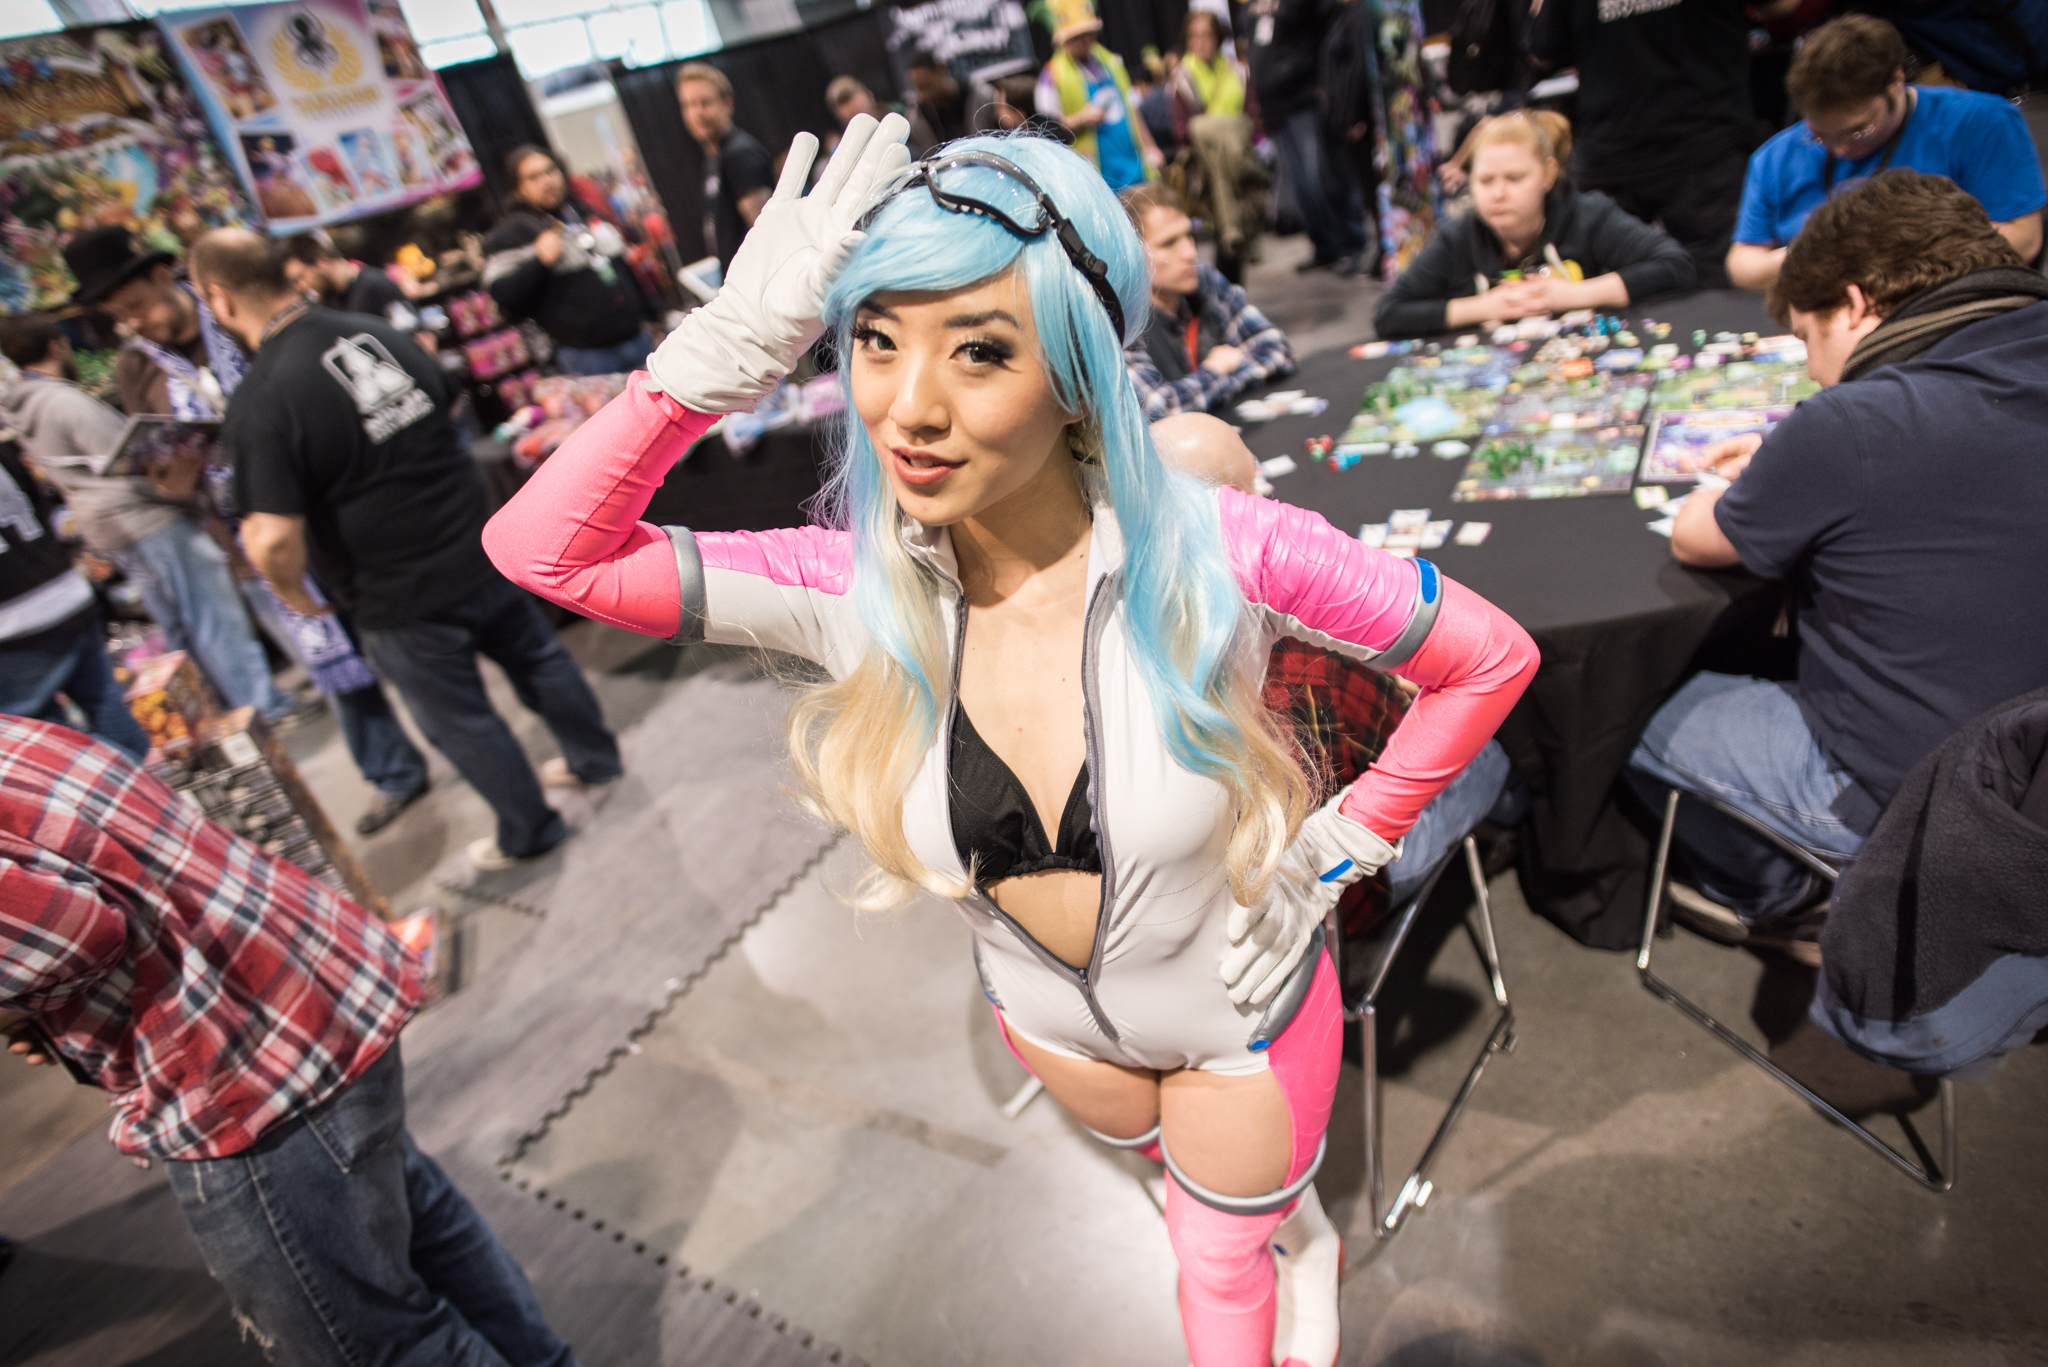 The Coolest Cosplay at PAX East, Day 3